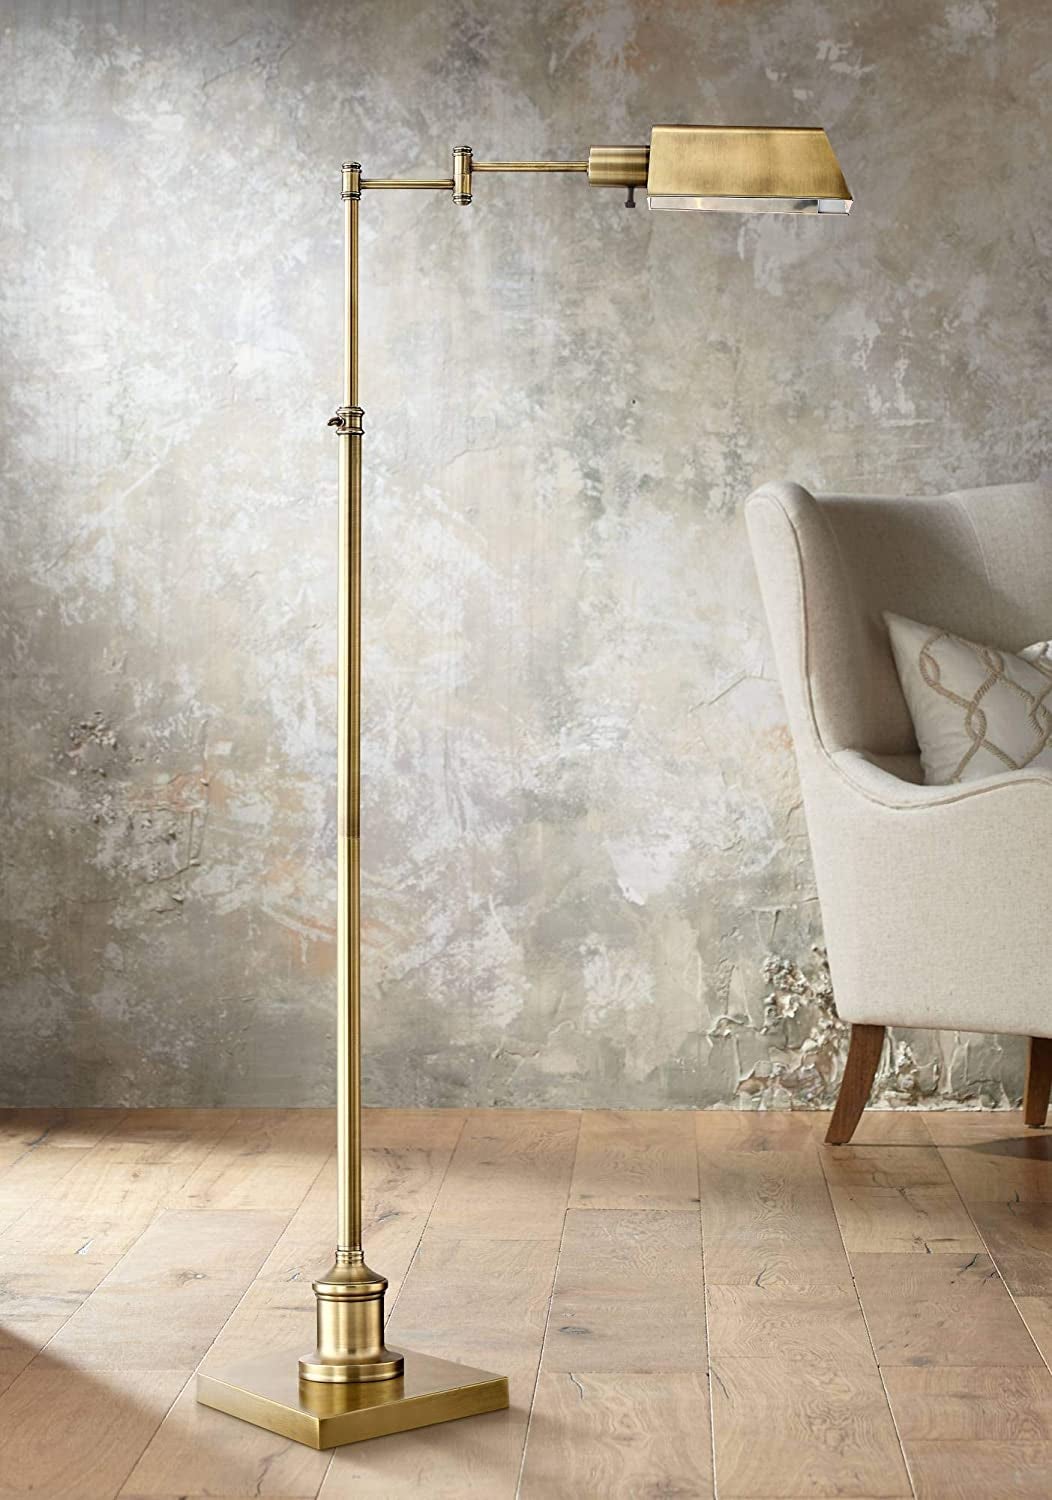 the gold floor lamp with an arm at a 90-degree angle